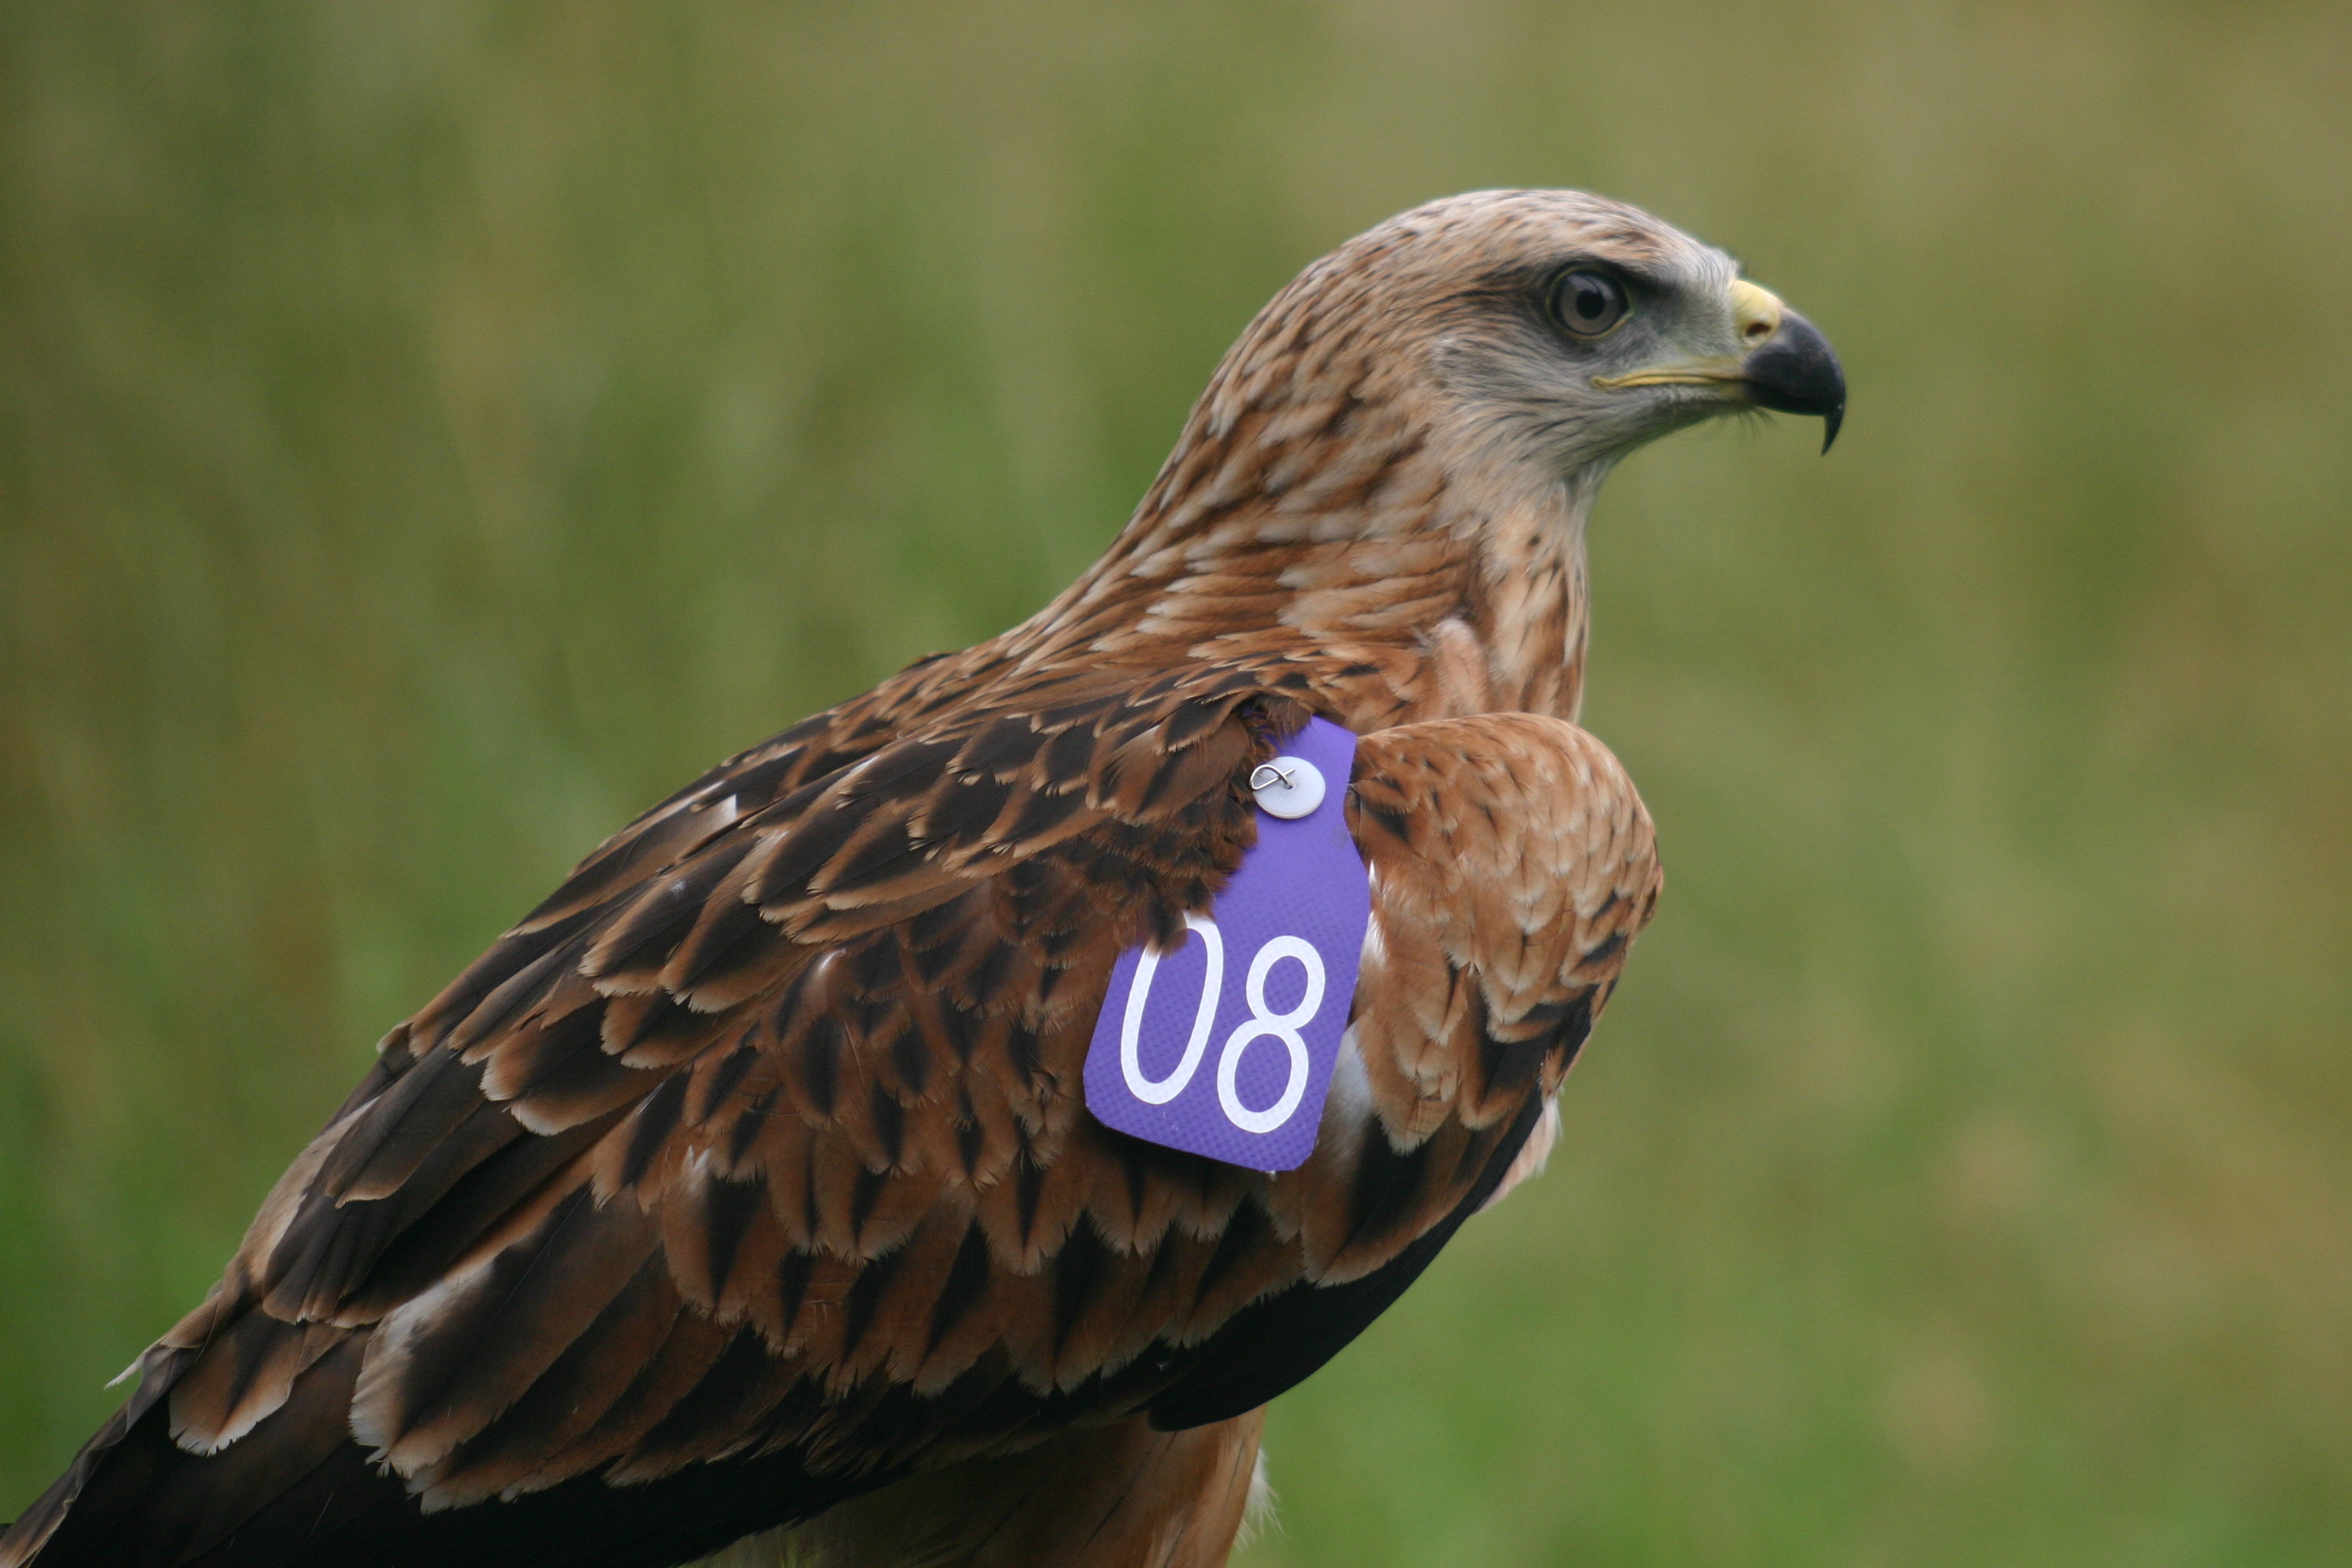 The red kites were reintroduced to the region in 2007.